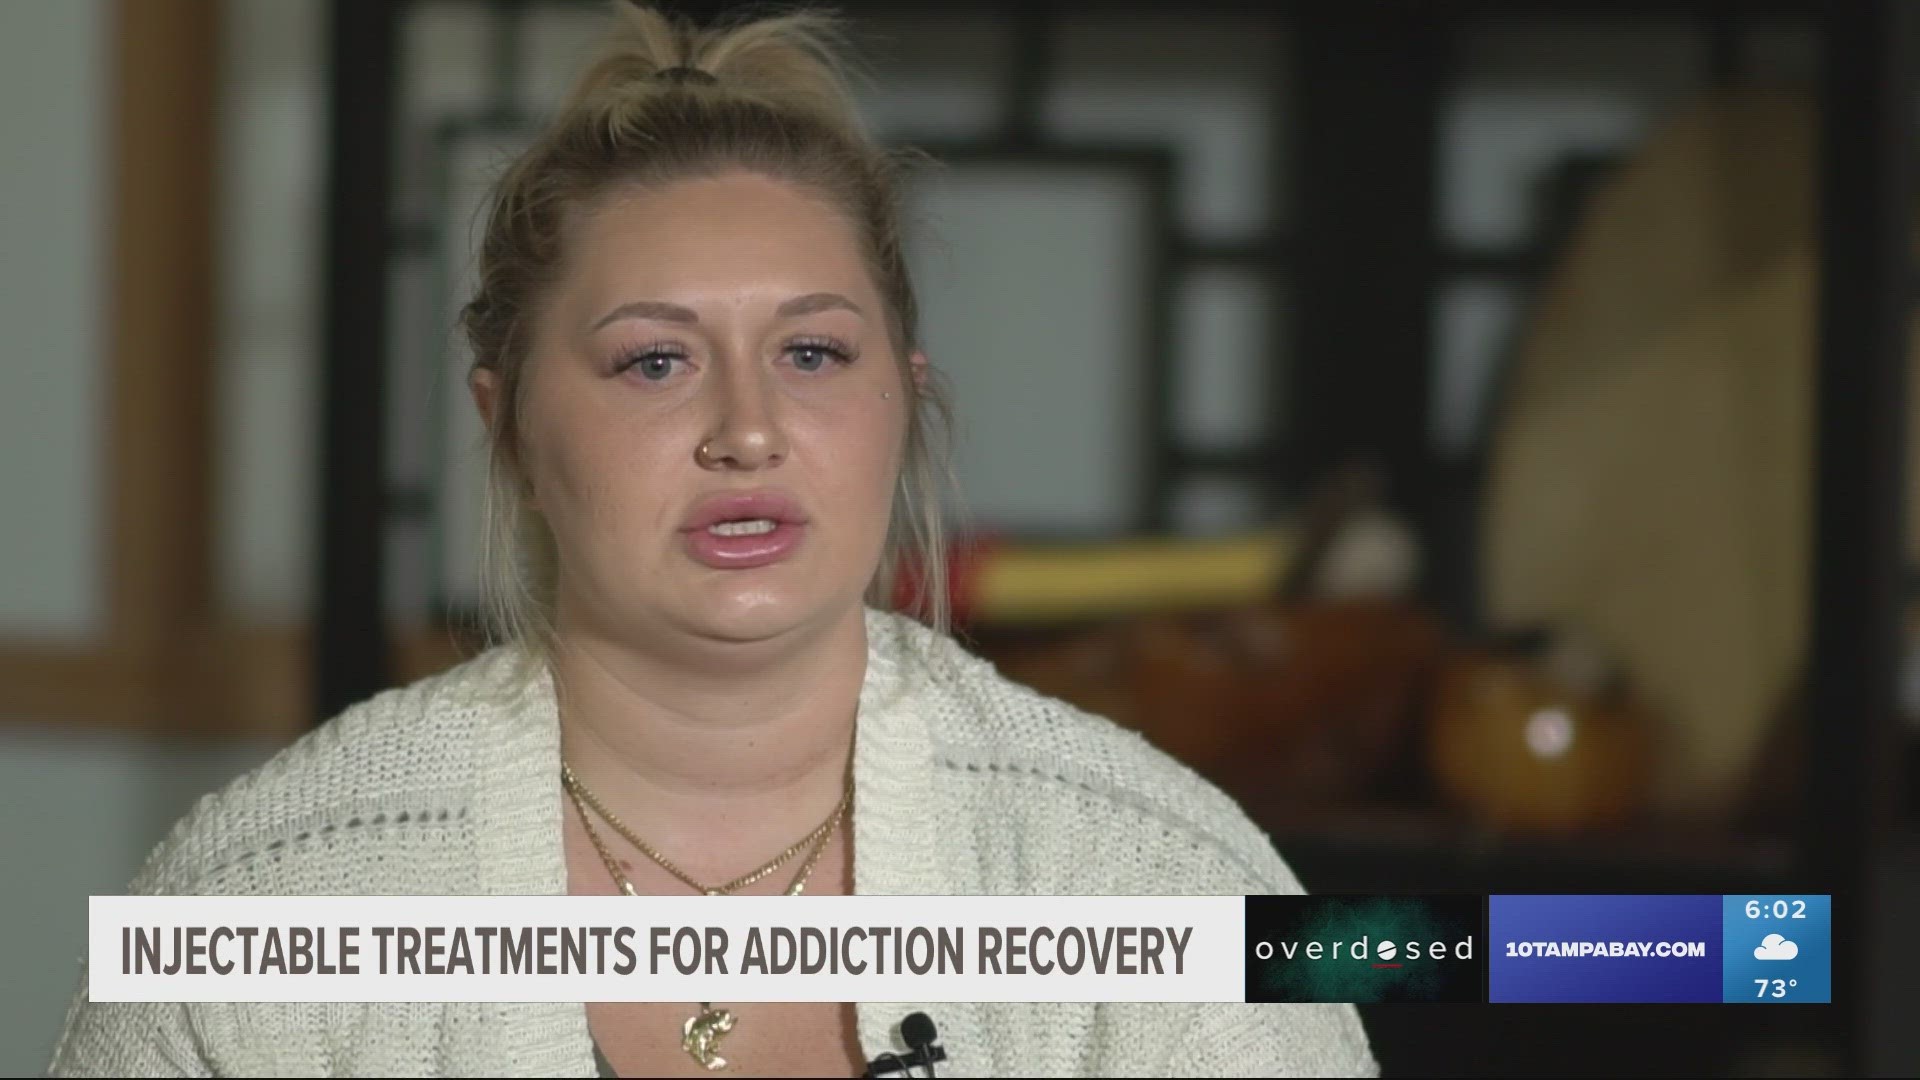 Patients in long-term recovery from addiction can get extended-release injectable treatments monthly, instead of daily treatments.